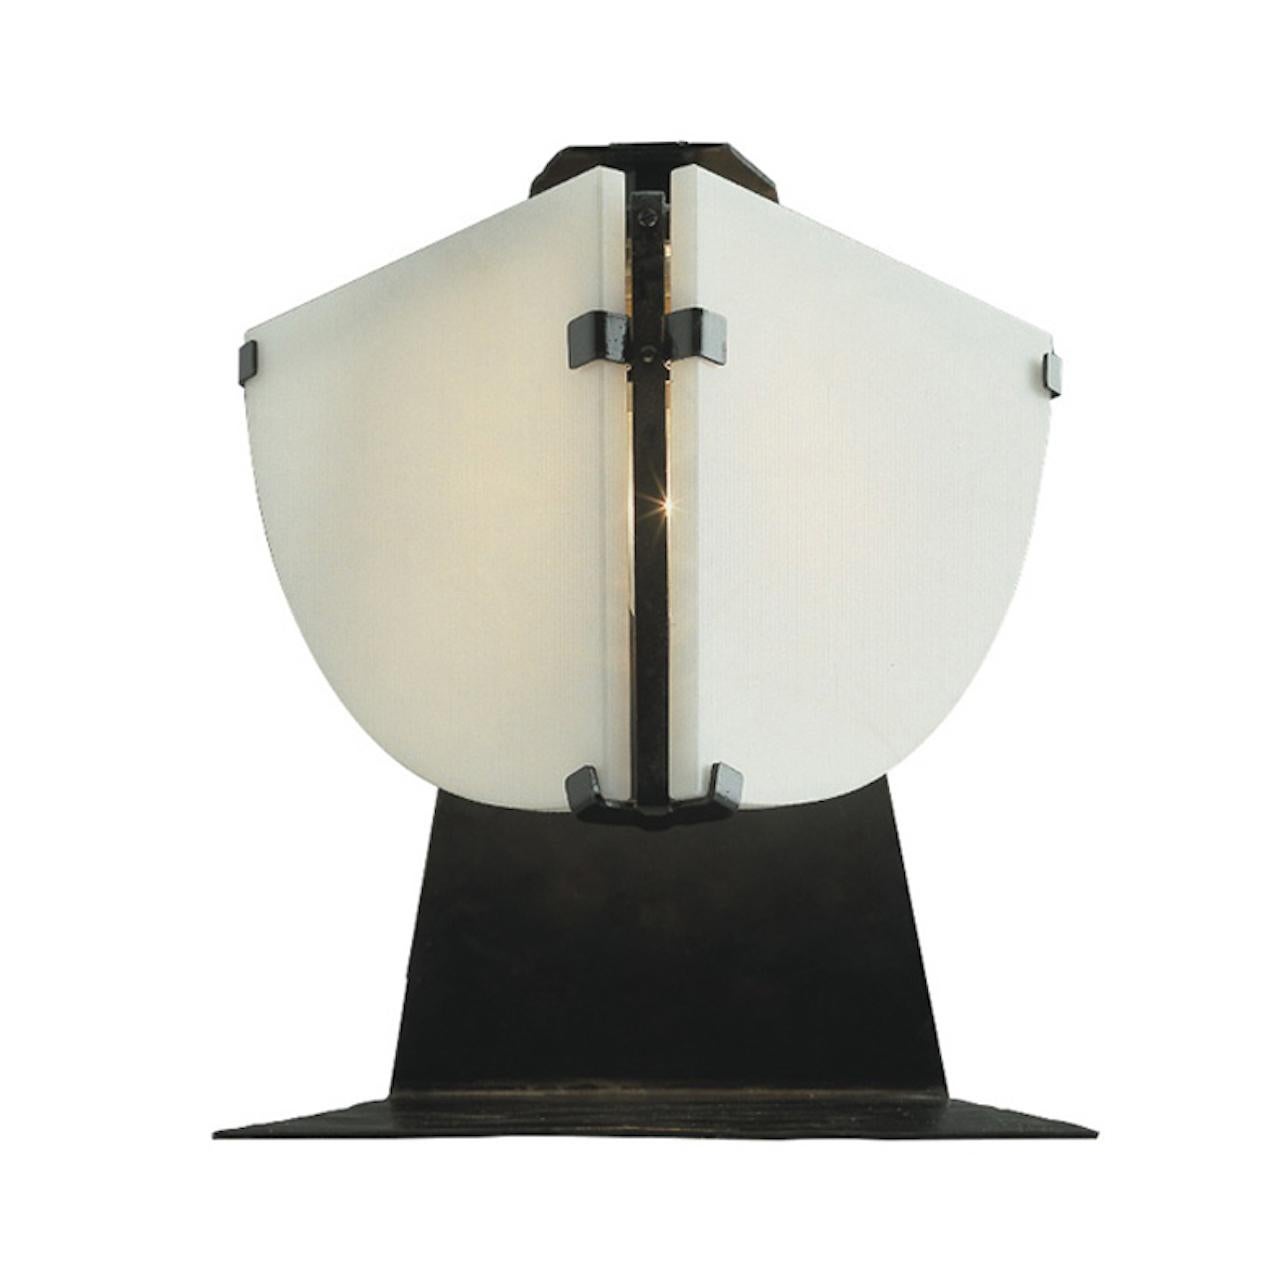 French Model RQF 132 Quart de Rond Table Lamp by Pierre Chareau for MCDE